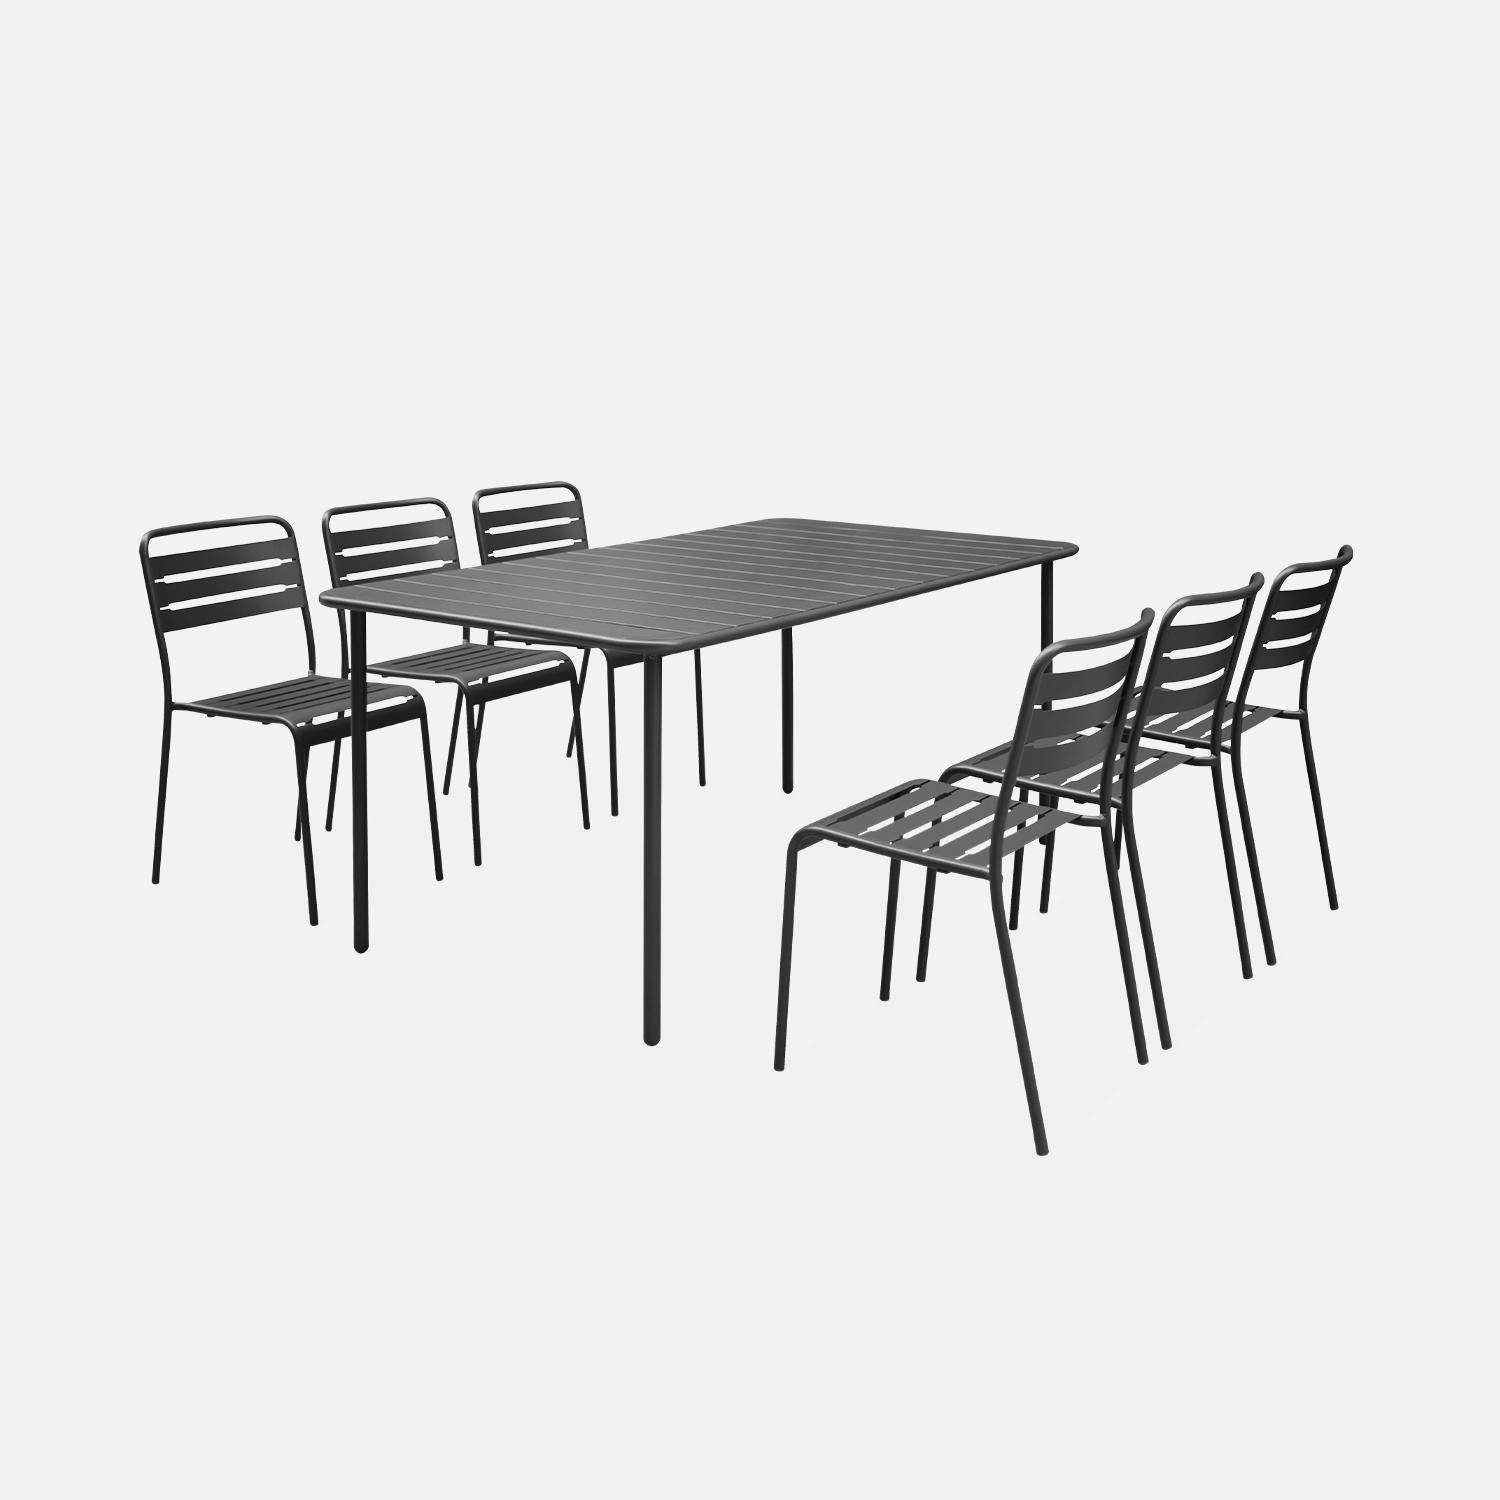 6-8 seater rectangular steel garden table set with chairs, 160cm, anthracite Photo3